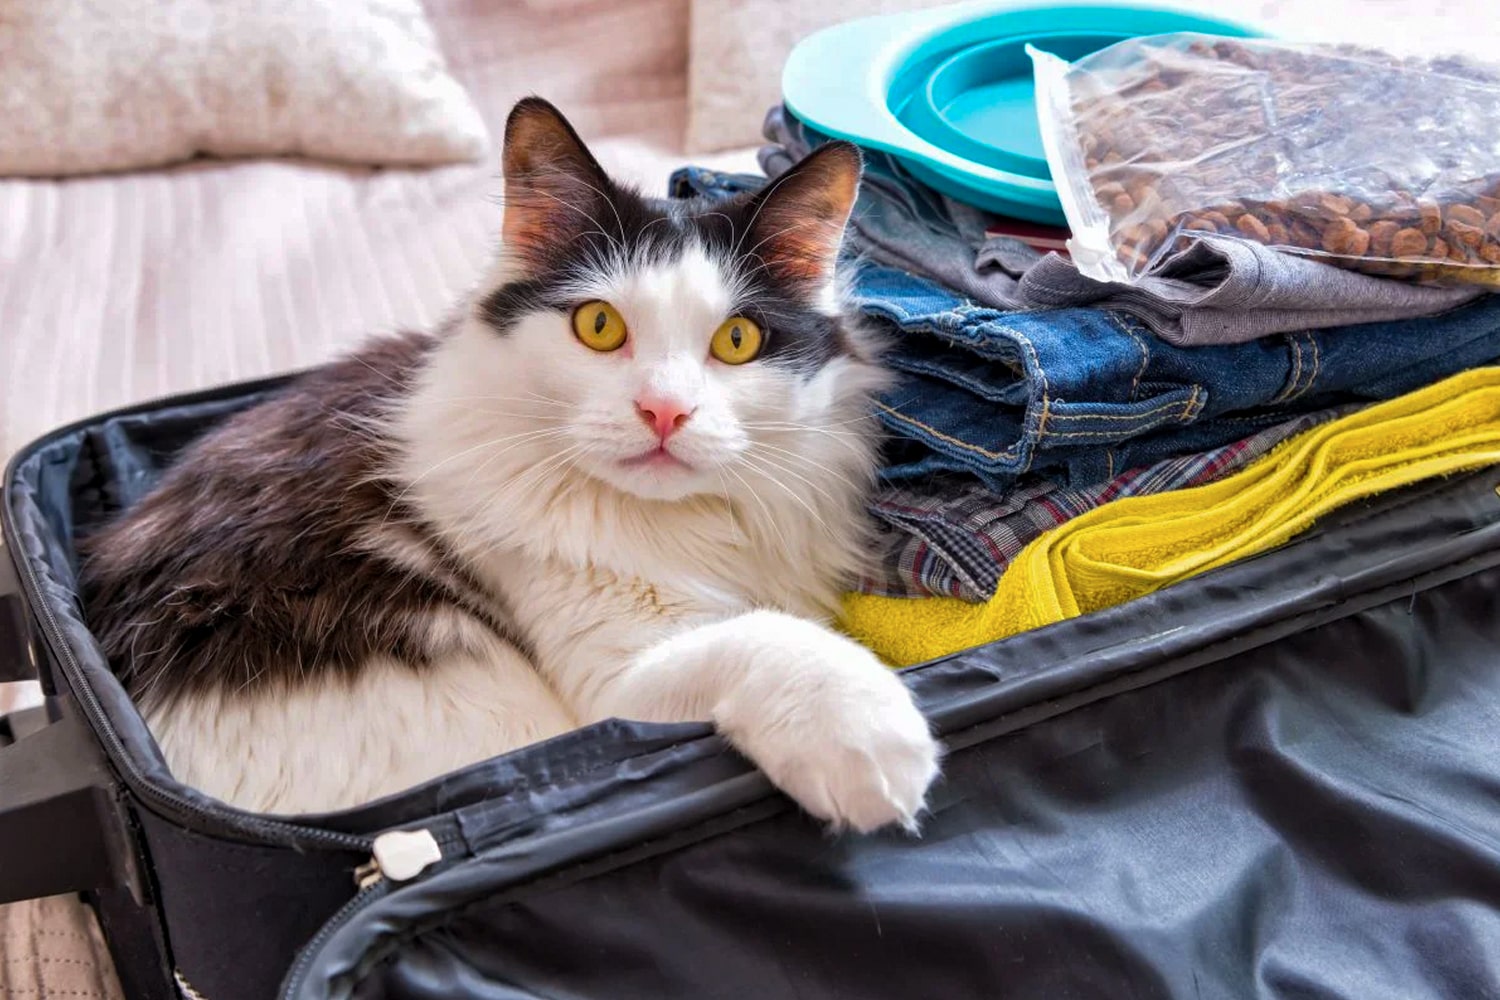 Benefits of traveling with your pet